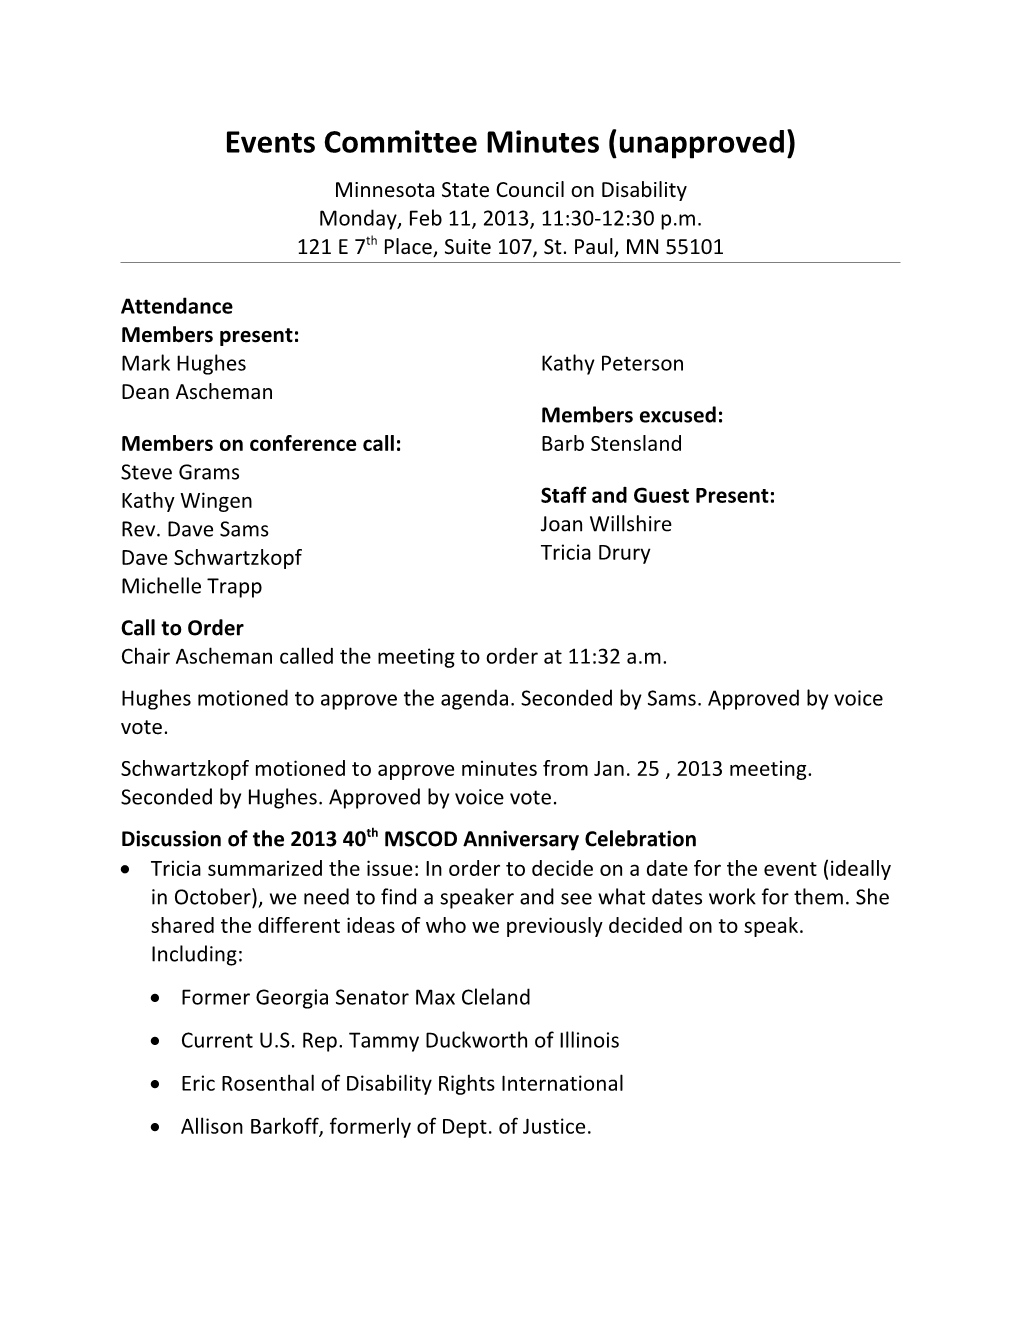 Events Committee Minutes, 2-11-13 (Unapproved)